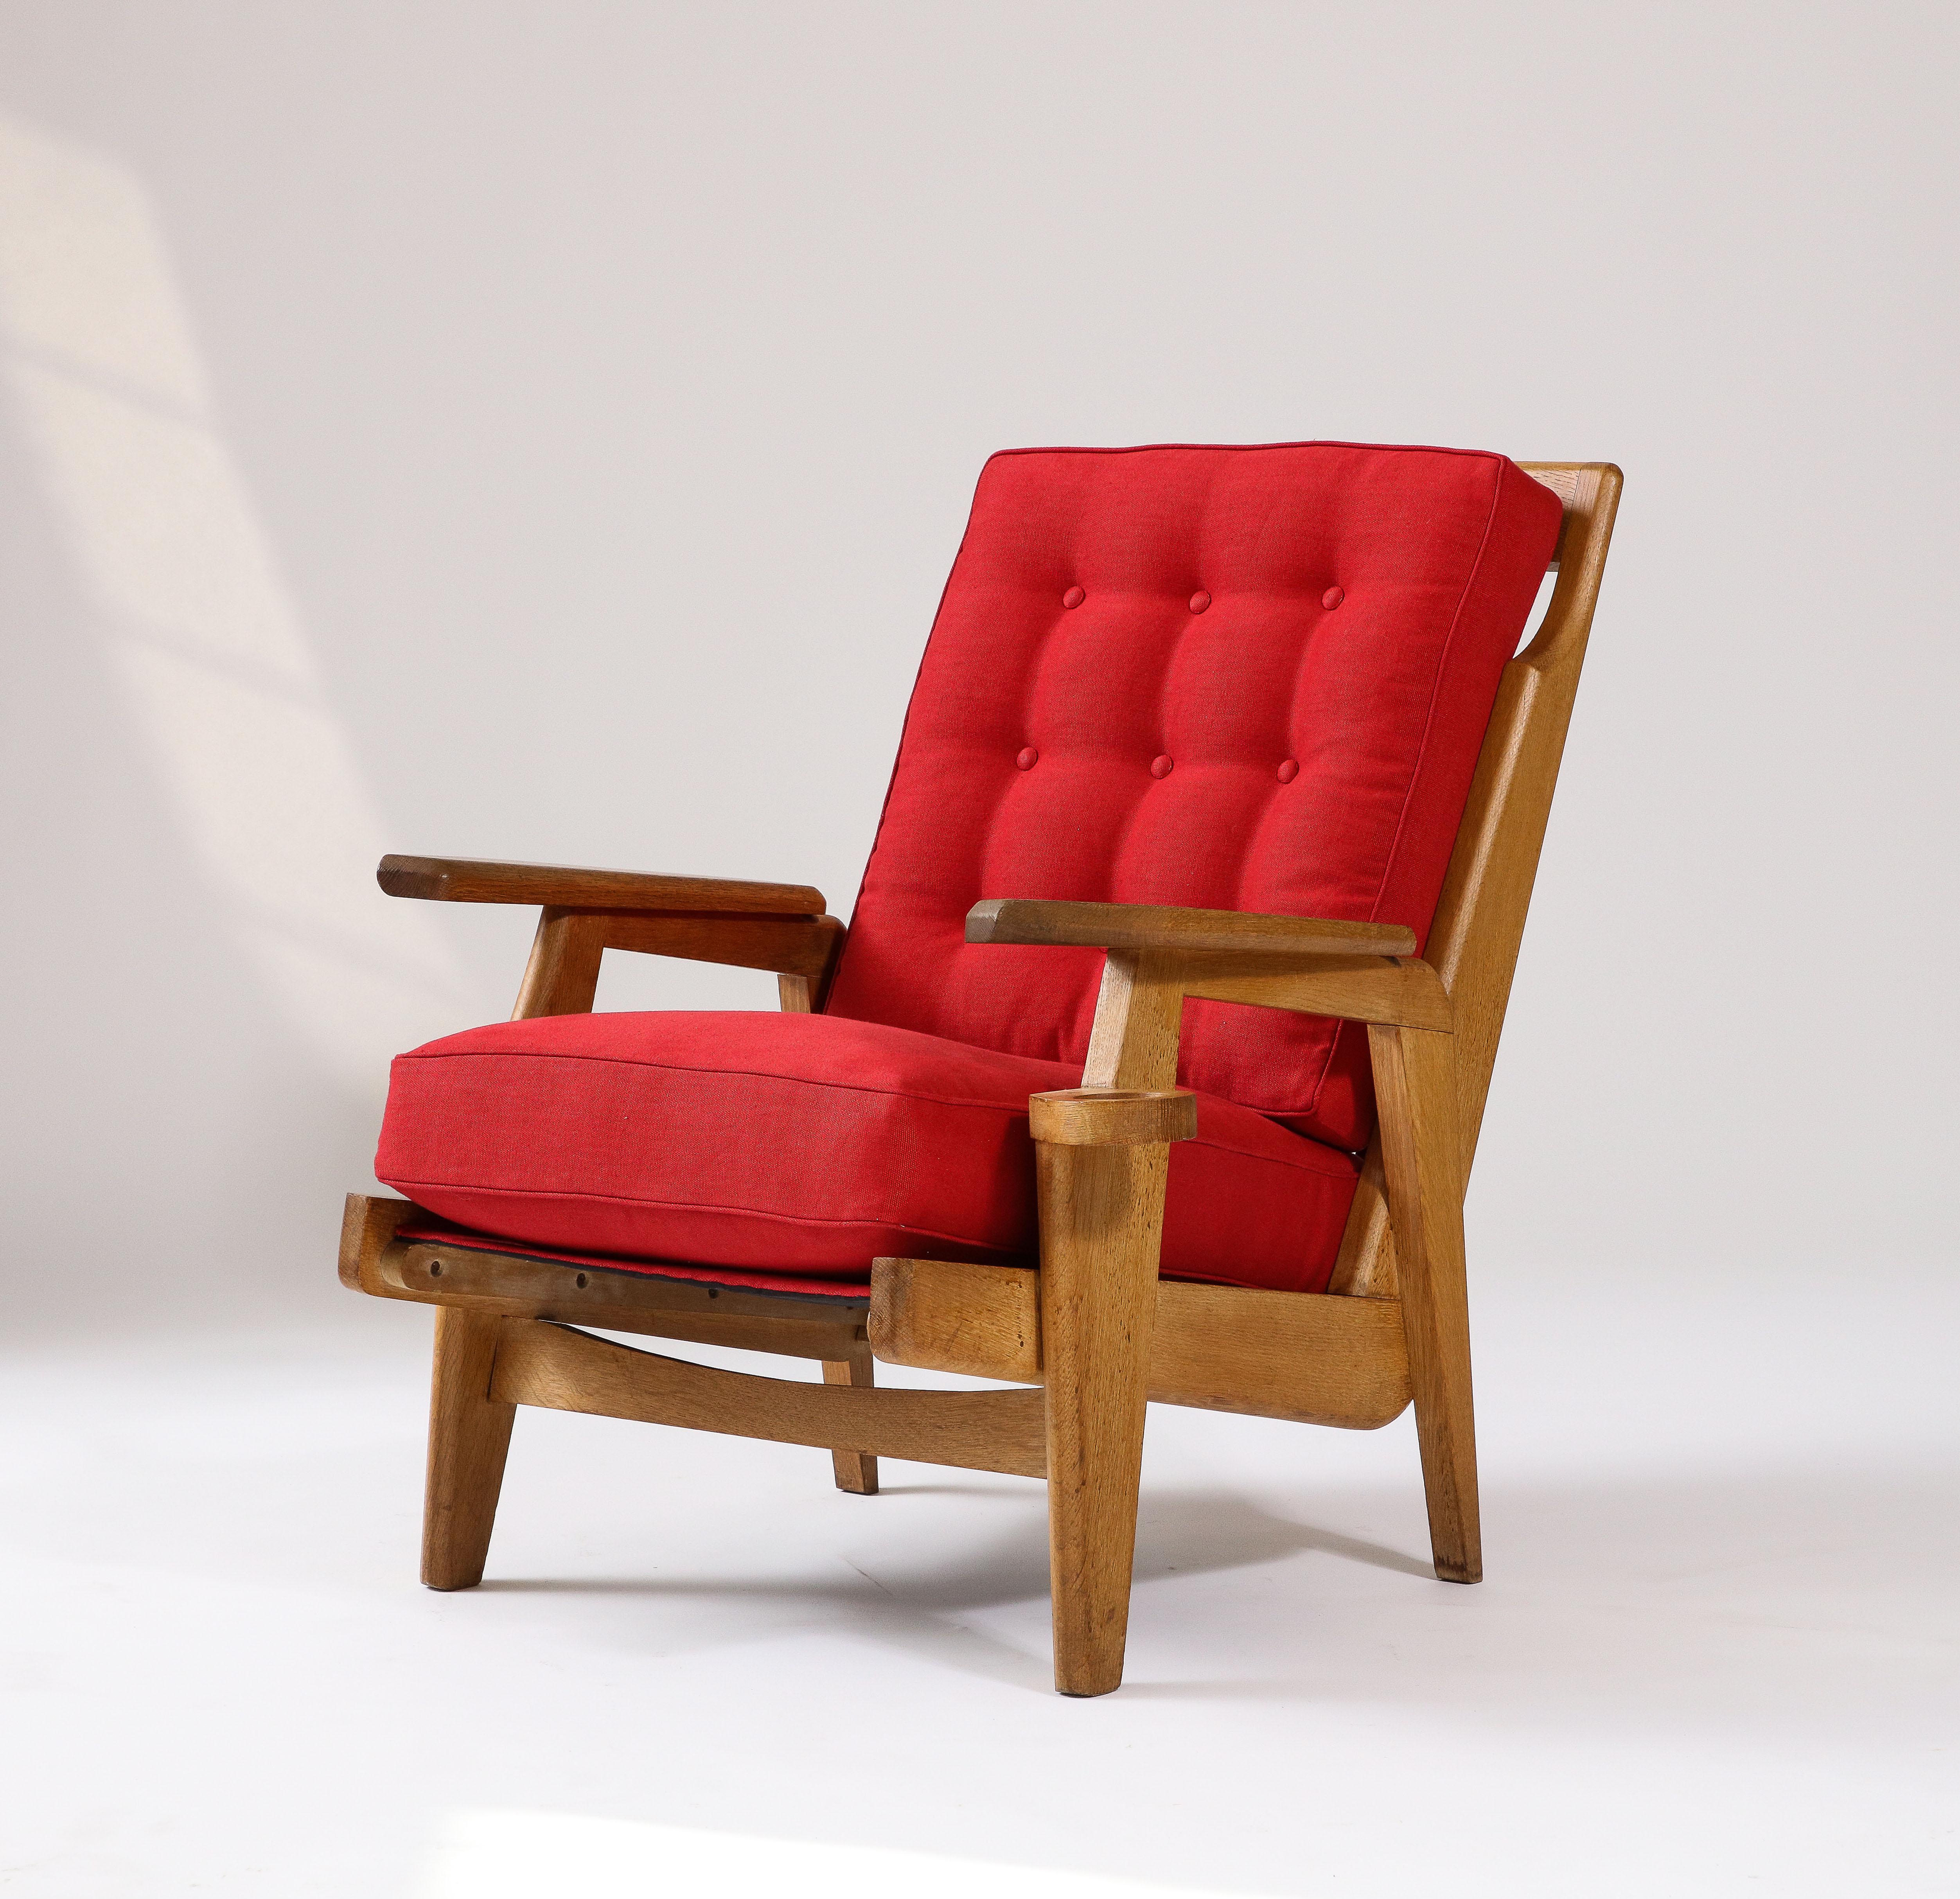 20th Century Oak and Upholstery Armchair by Guillerme et Chambron, France, c. 1960 For Sale